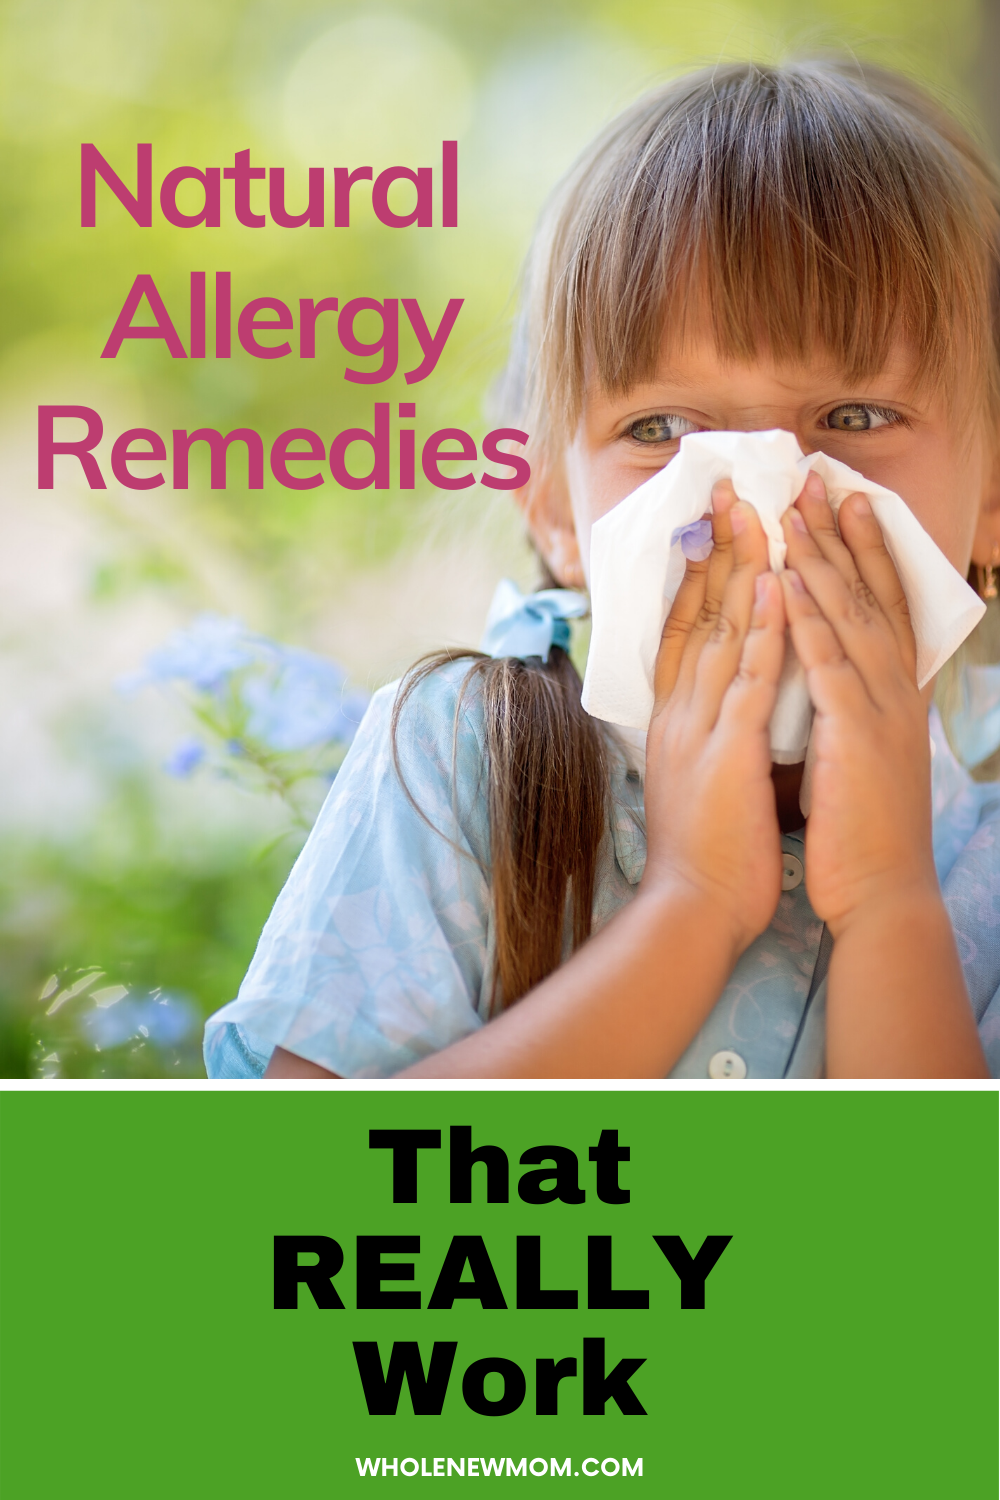 11 Natural Allergy Remedies that REALLY Work!